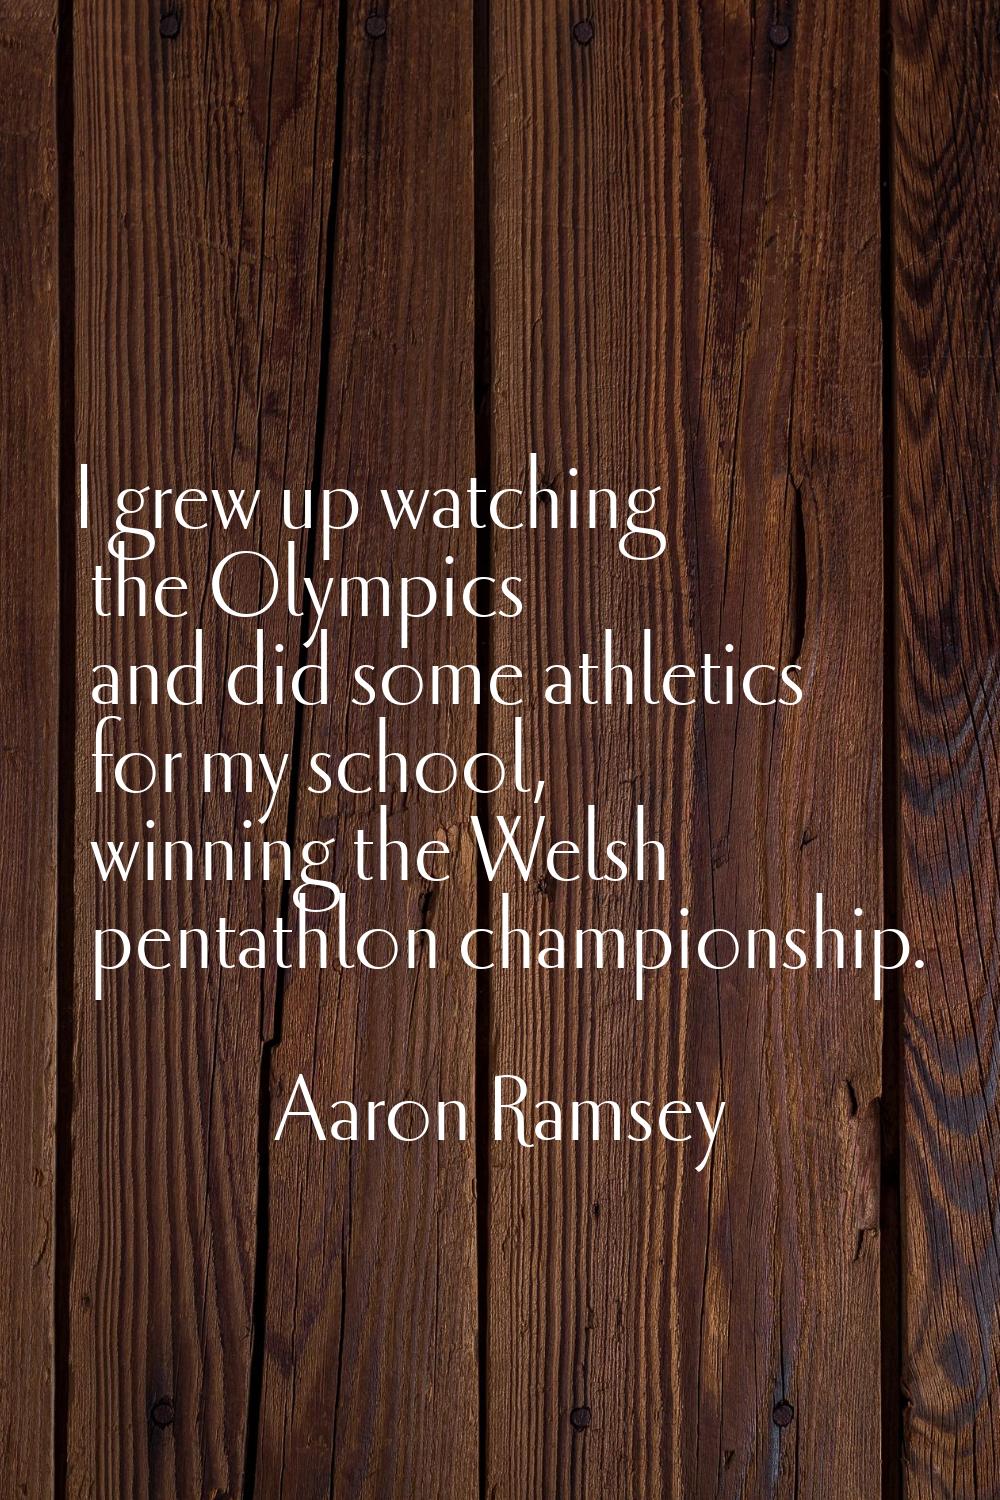 I grew up watching the Olympics and did some athletics for my school, winning the Welsh pentathlon 